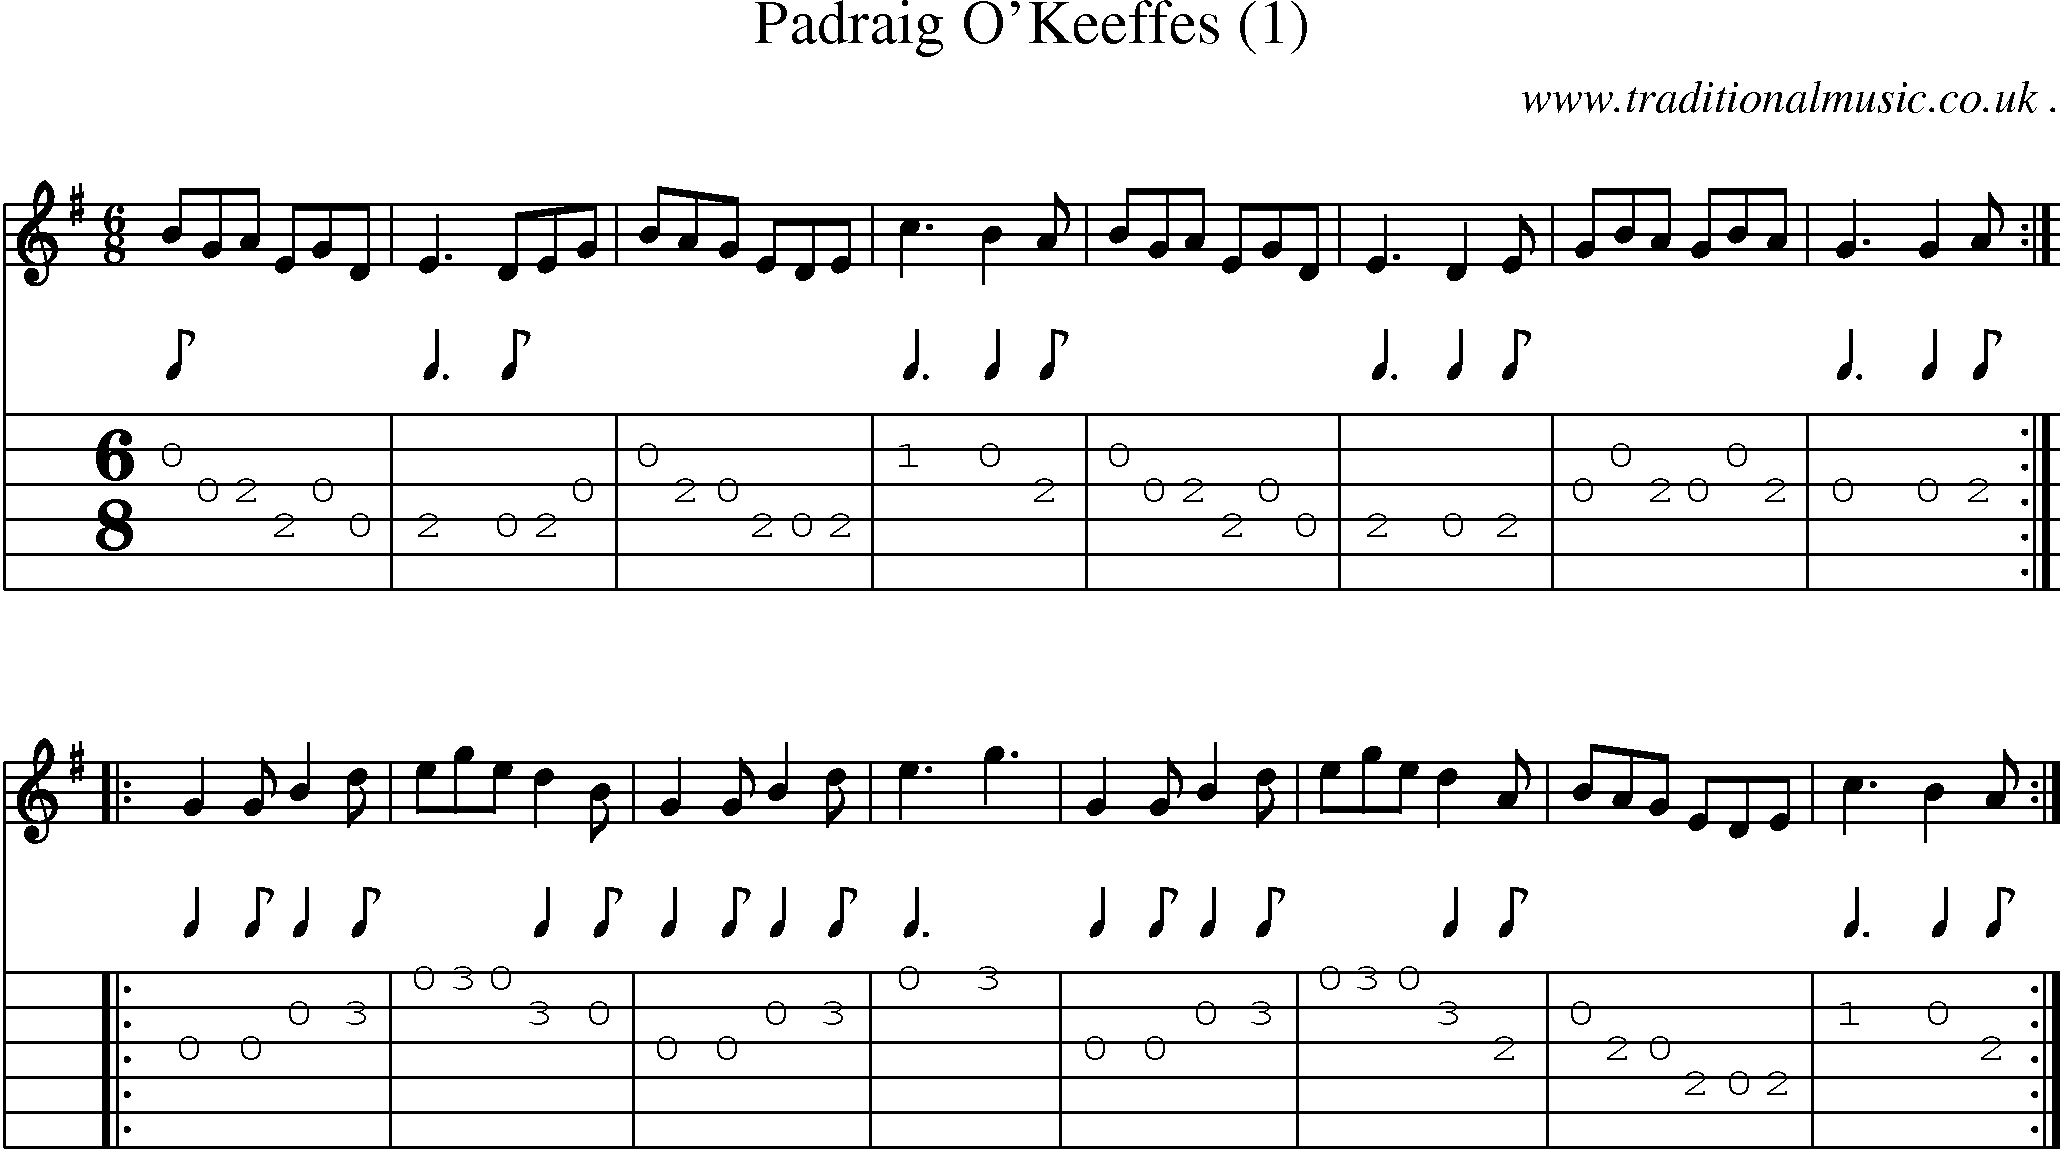 Sheet-Music and Guitar Tabs for Padraig Okeeffes (1)